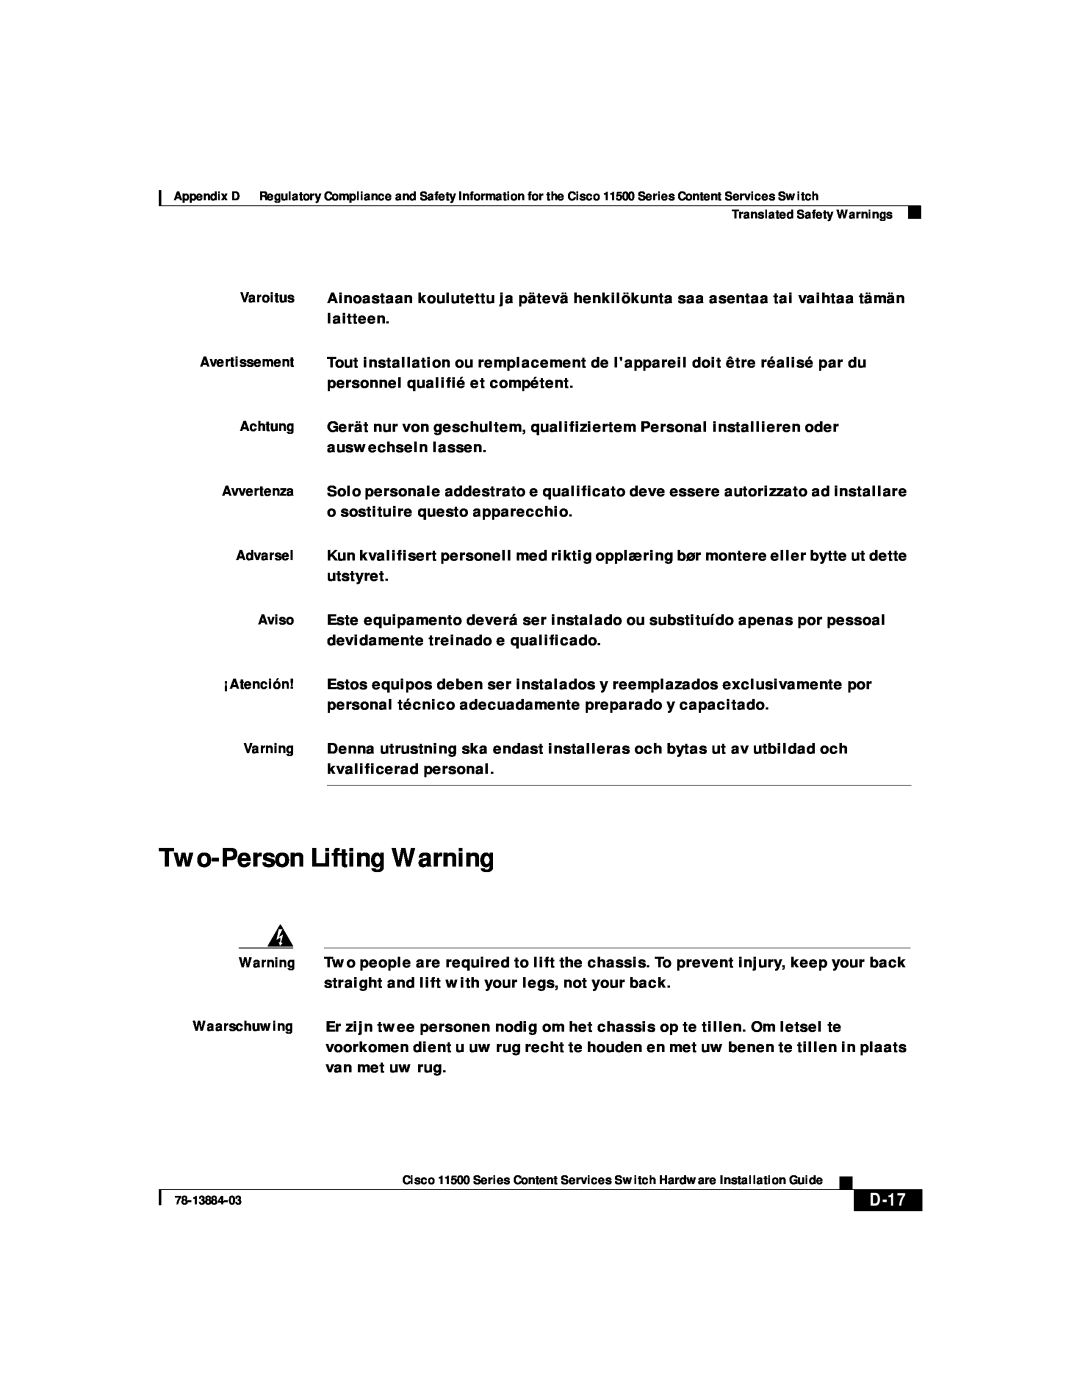 Cisco Systems 11500 Series manual Two-Person Lifting Warning, D-17 